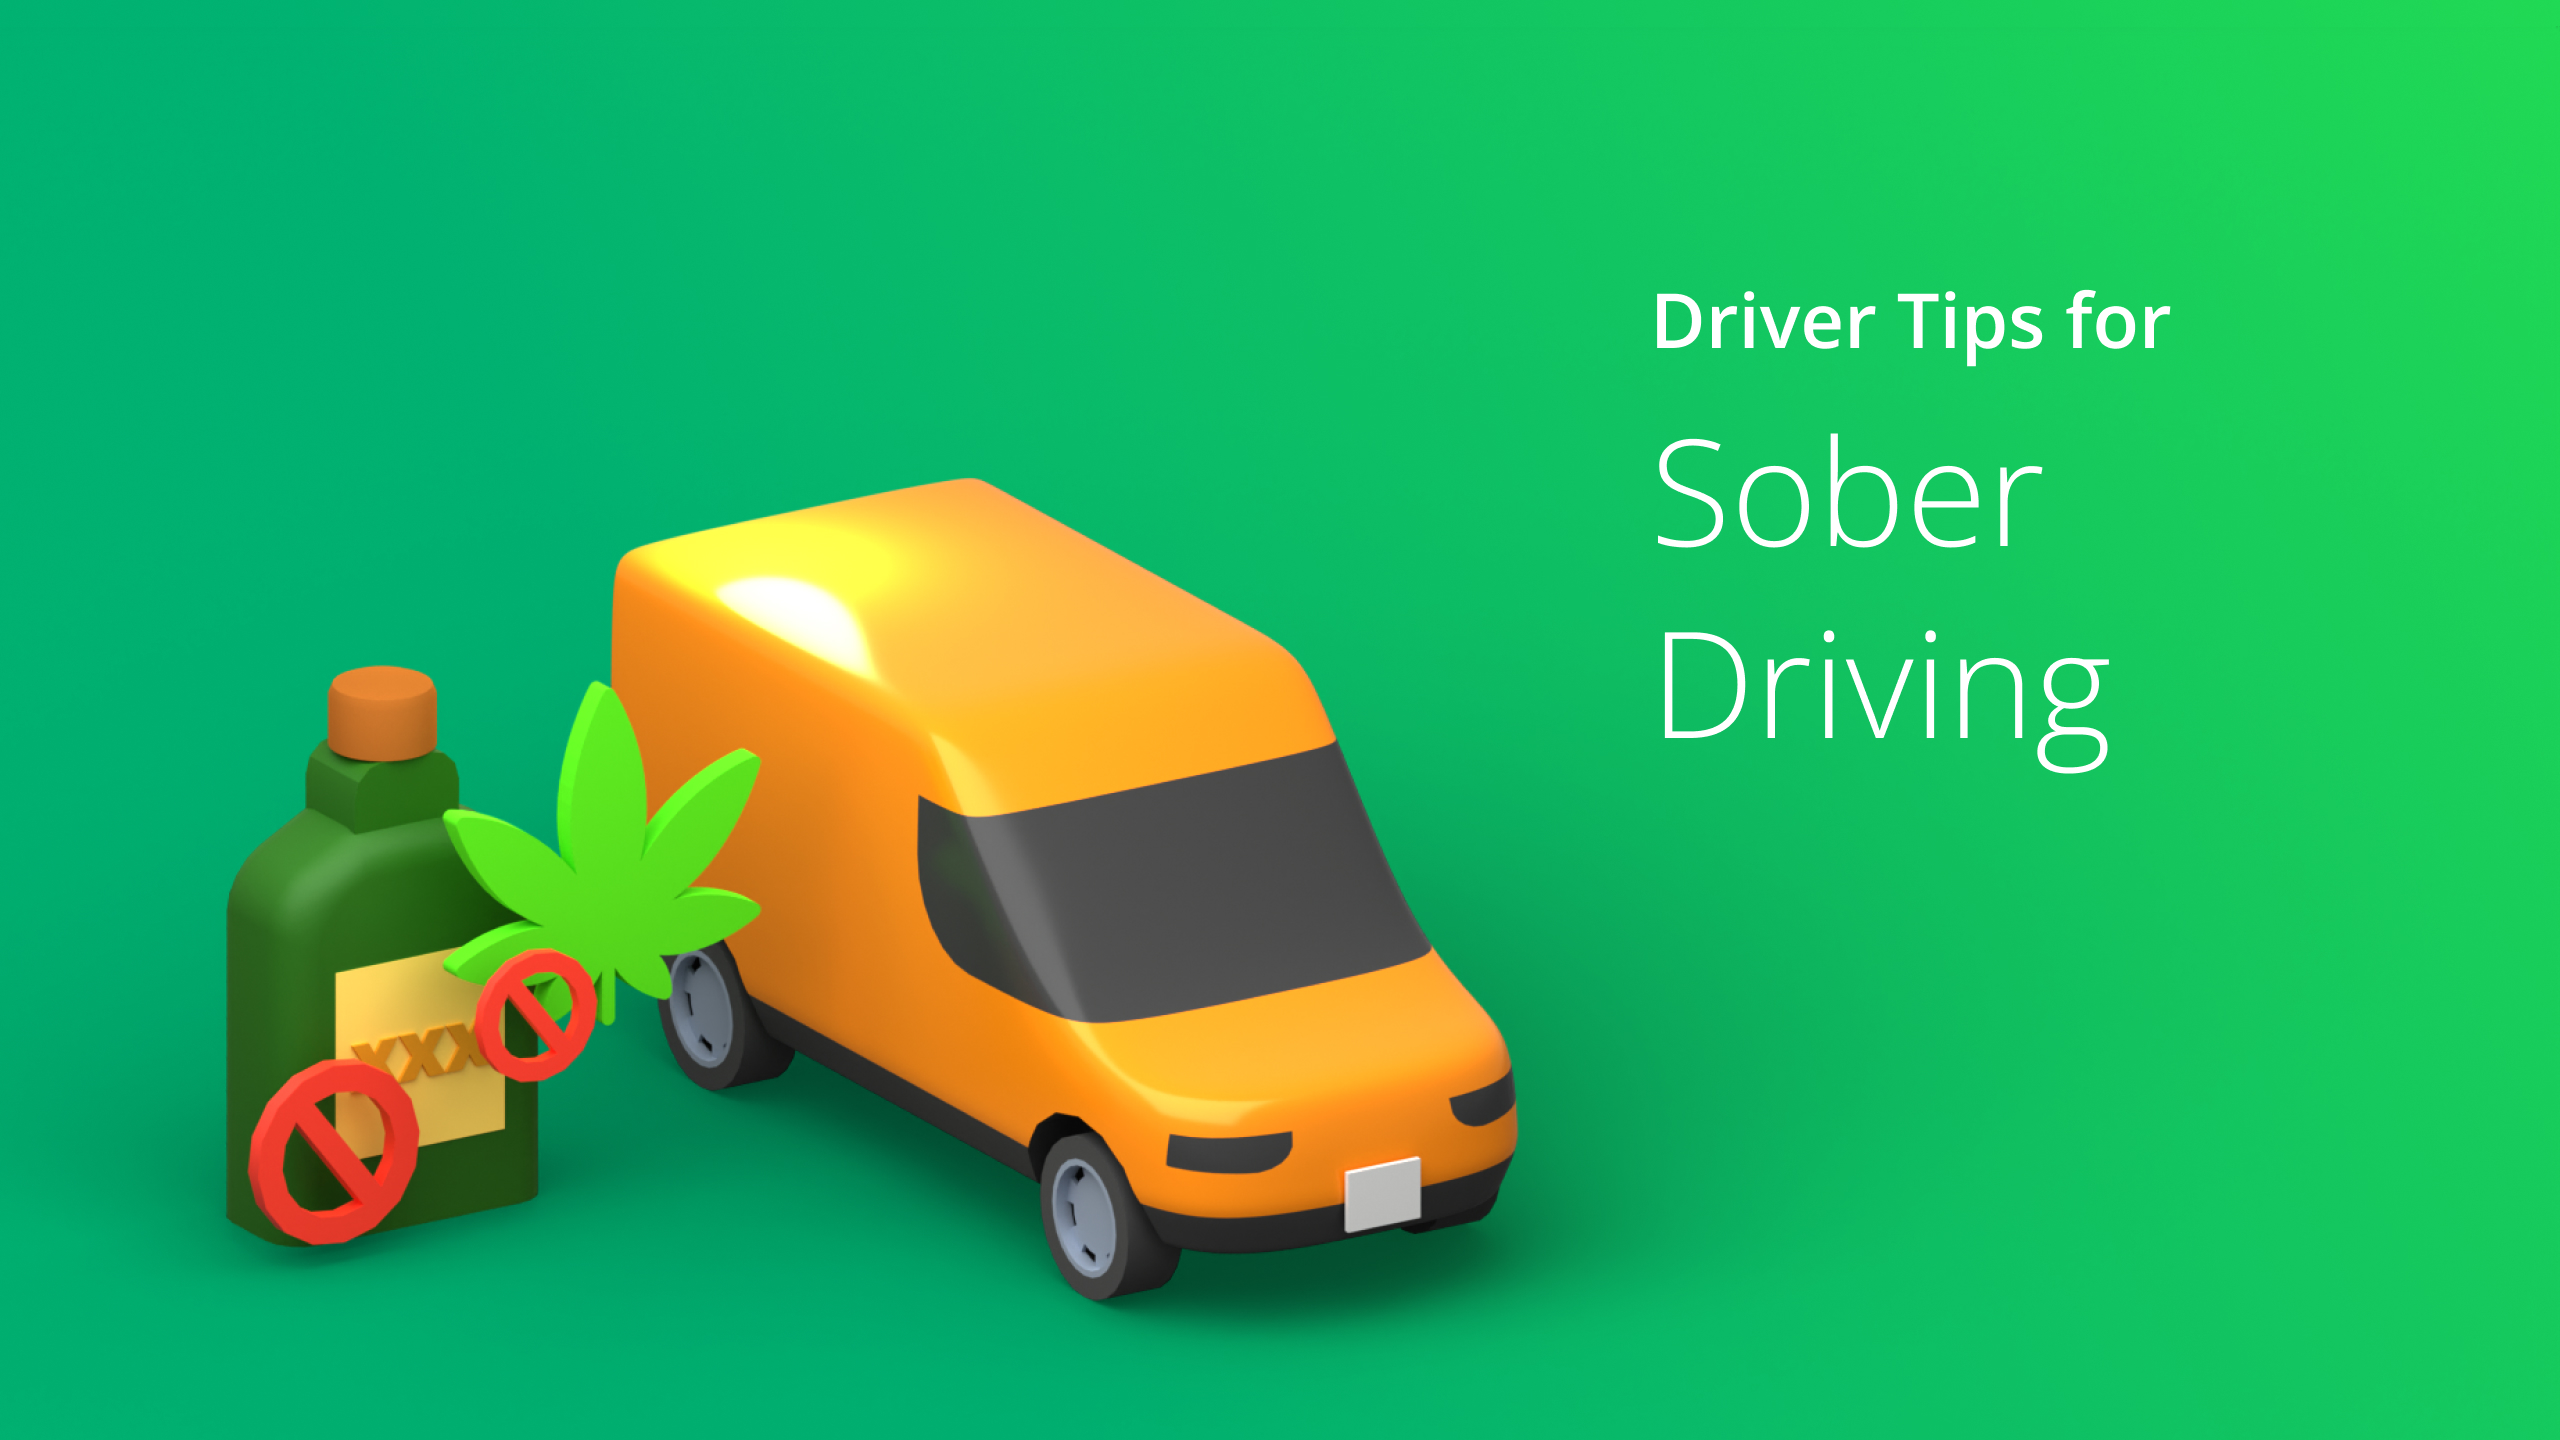 Custom Image - Driver Tips for Sober Driving